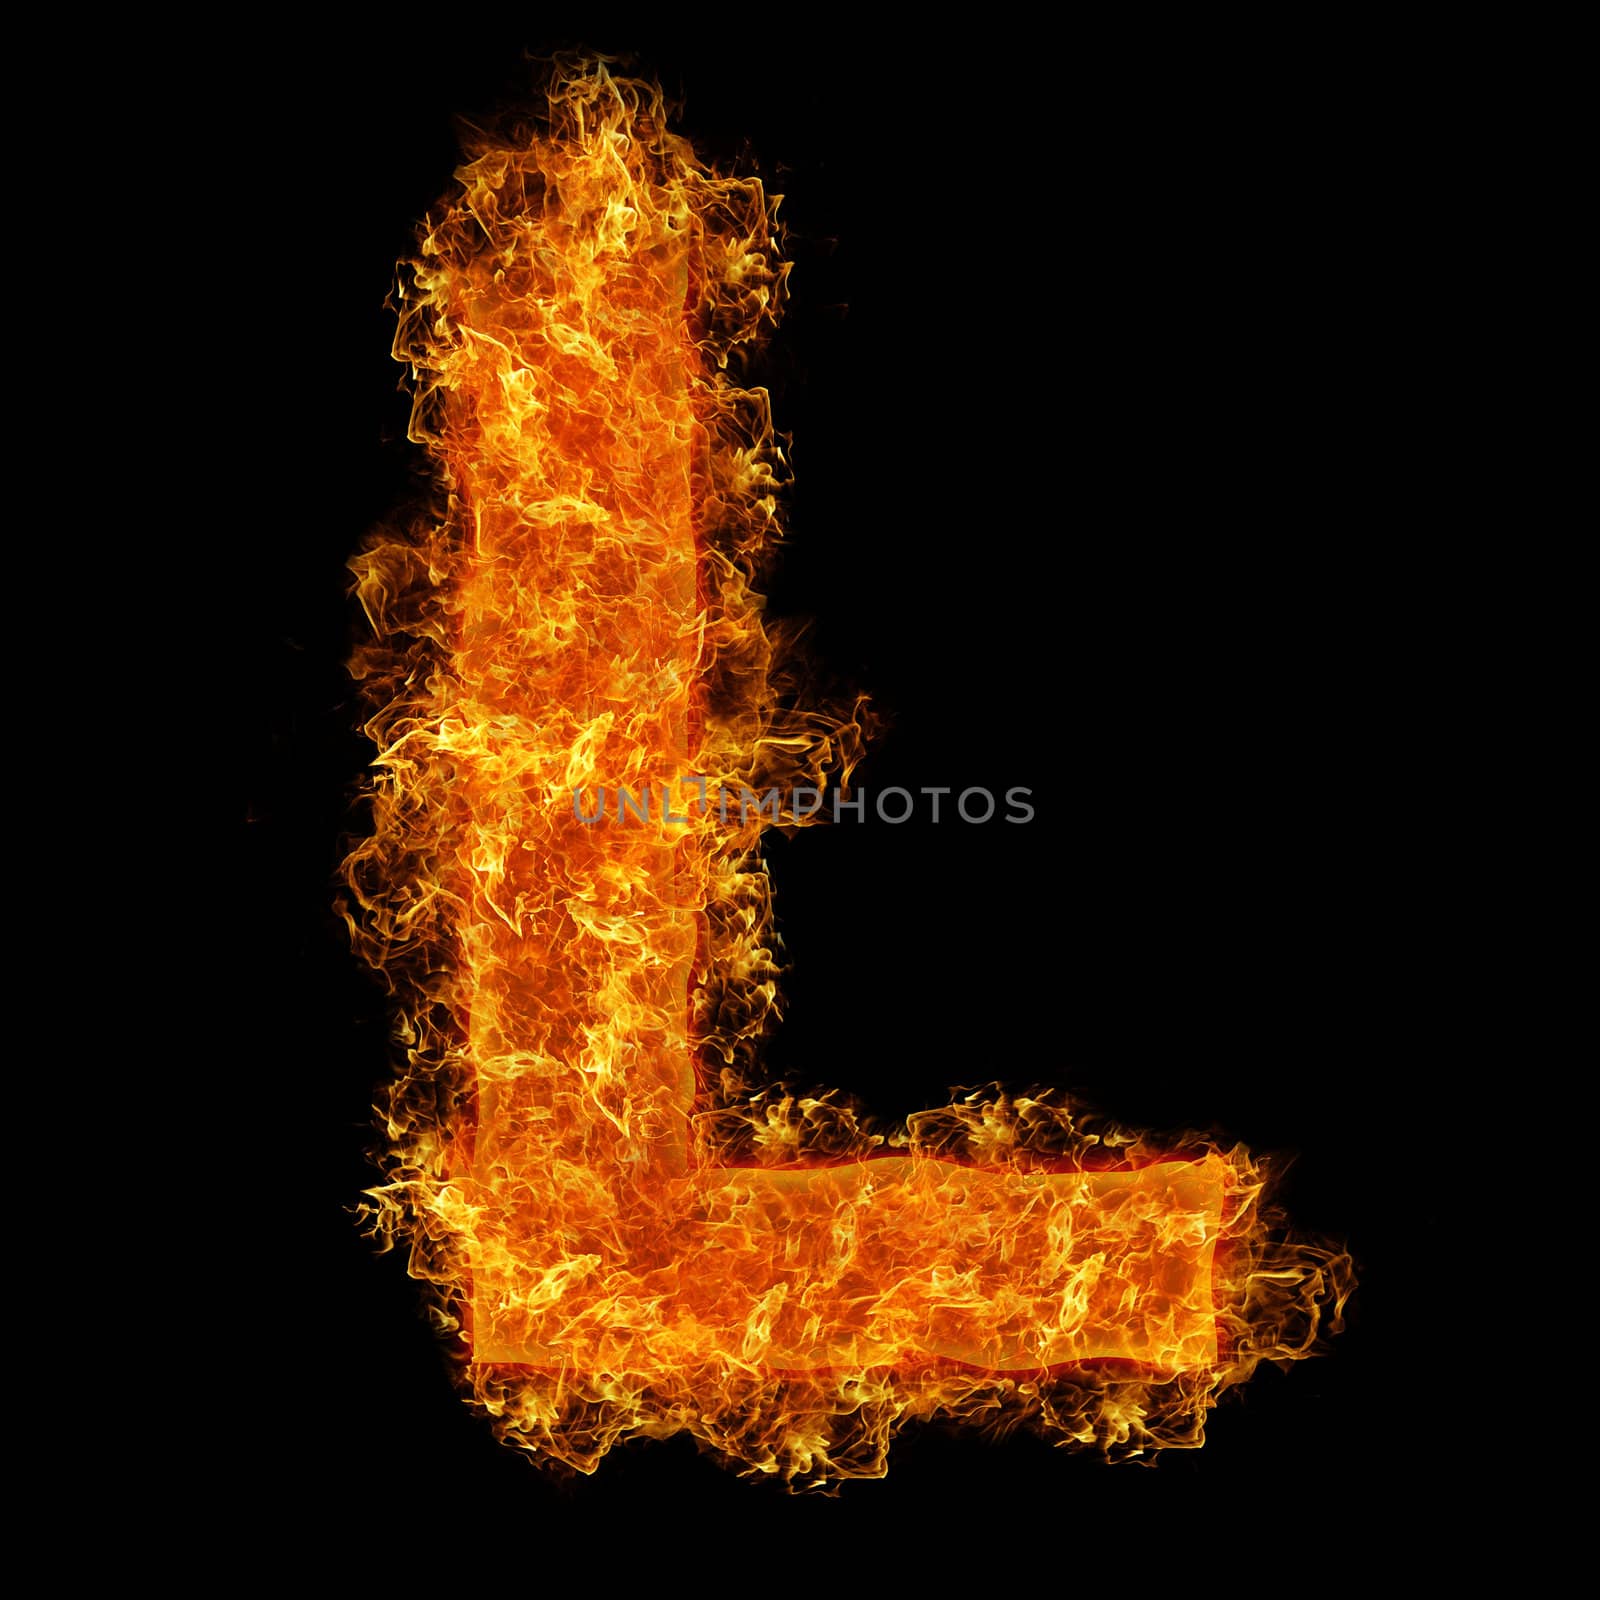 Fire letter L by rusak